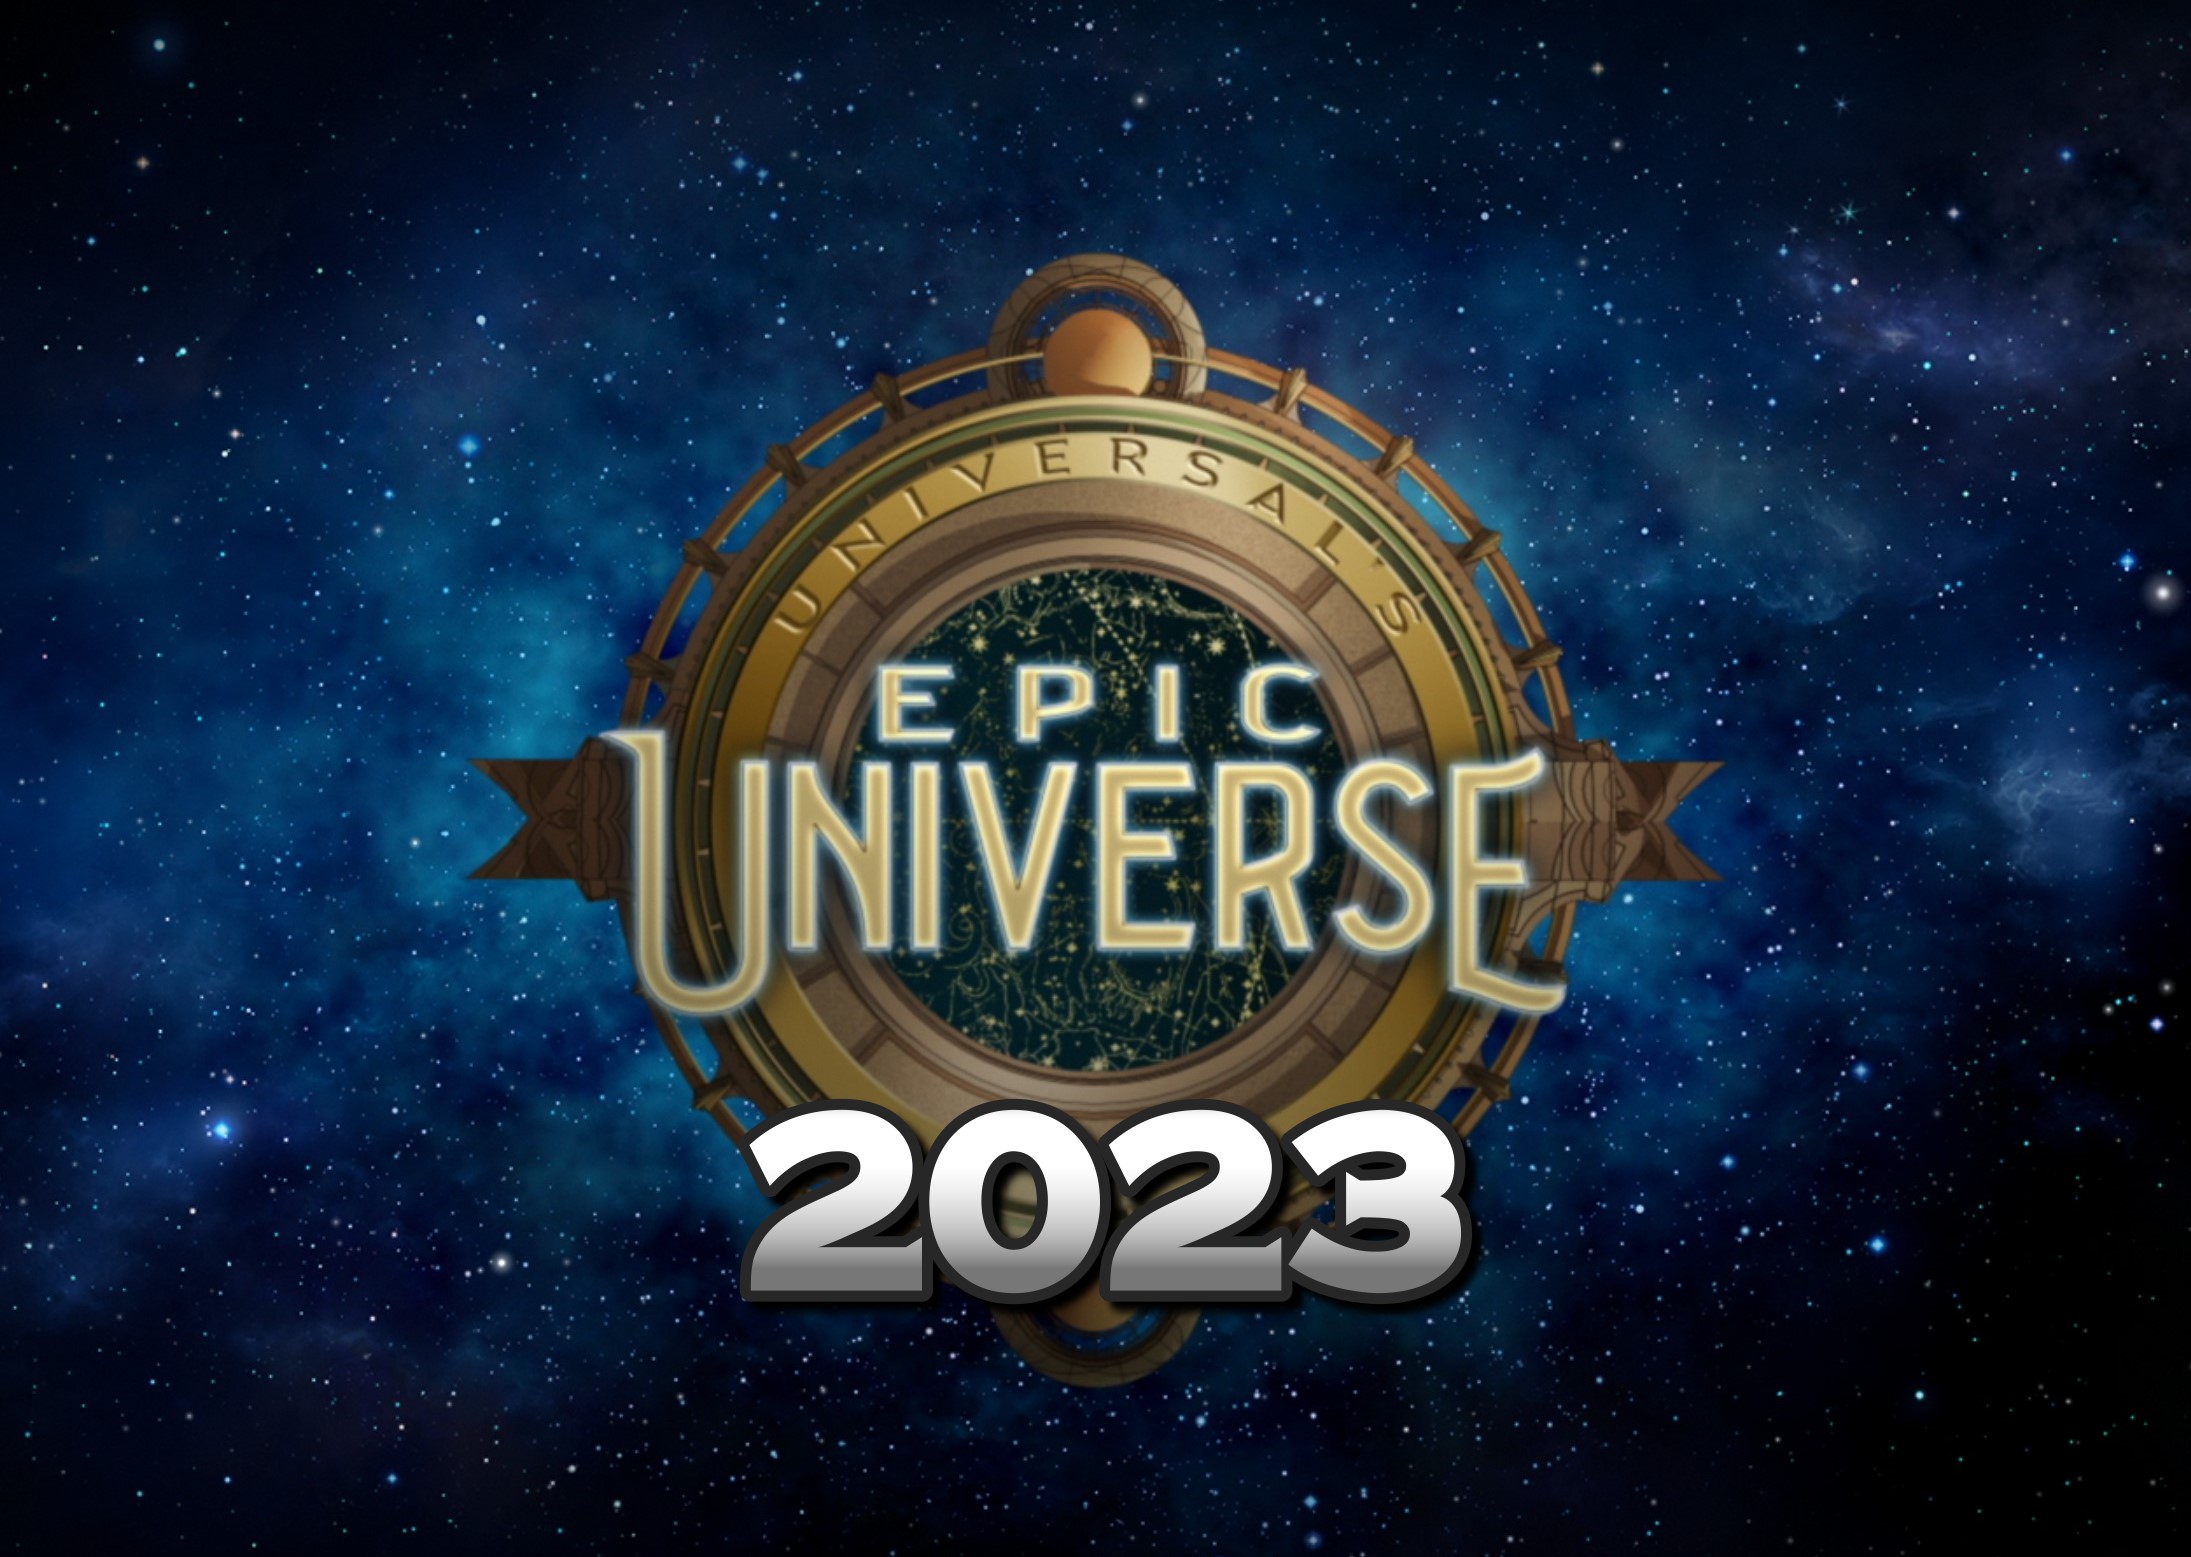 Comcast Confirms 2023 Opening for Universal’s Epic Universe Orlando